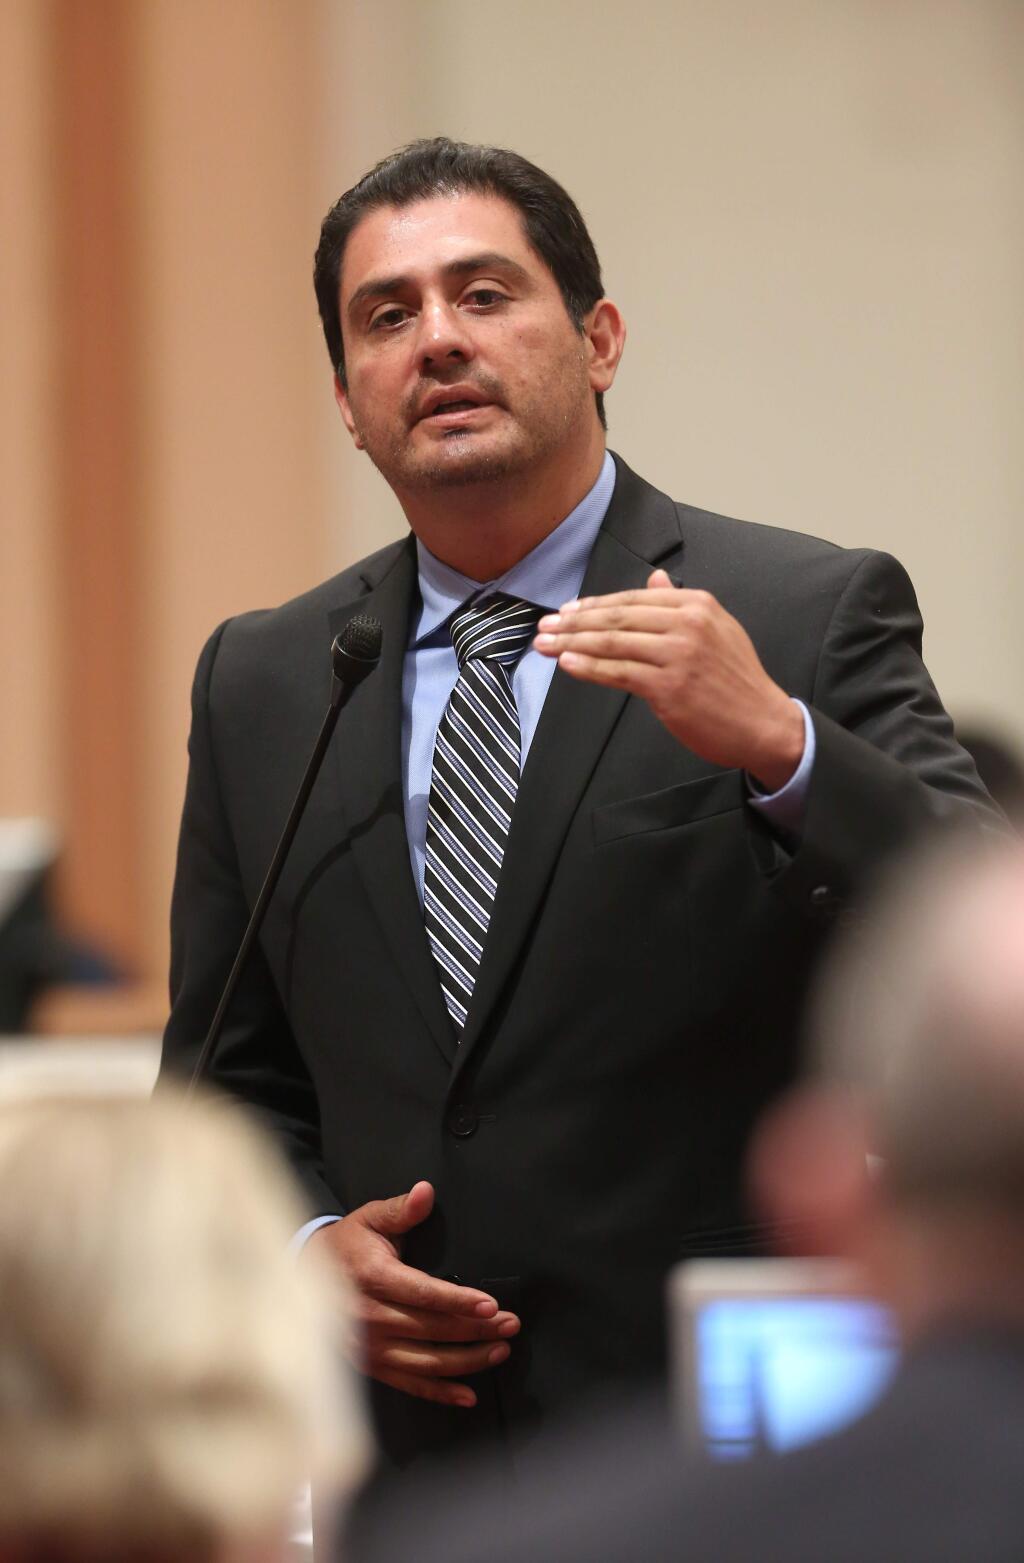 In this photo taken Monday, Aug. 18, 2014, is state Sen. Ben Hueso, D-San Diego, who was arrested on charges of drunken driving in Sacramento. Hueso was booked into the Sacramento County Jail at 3:27 a.m. Friday after being arrested on suspicion of drunken driving and driving with a blood alcohol content of 0.08 percent or more. (AP Photo/Rich Pedroncelli)